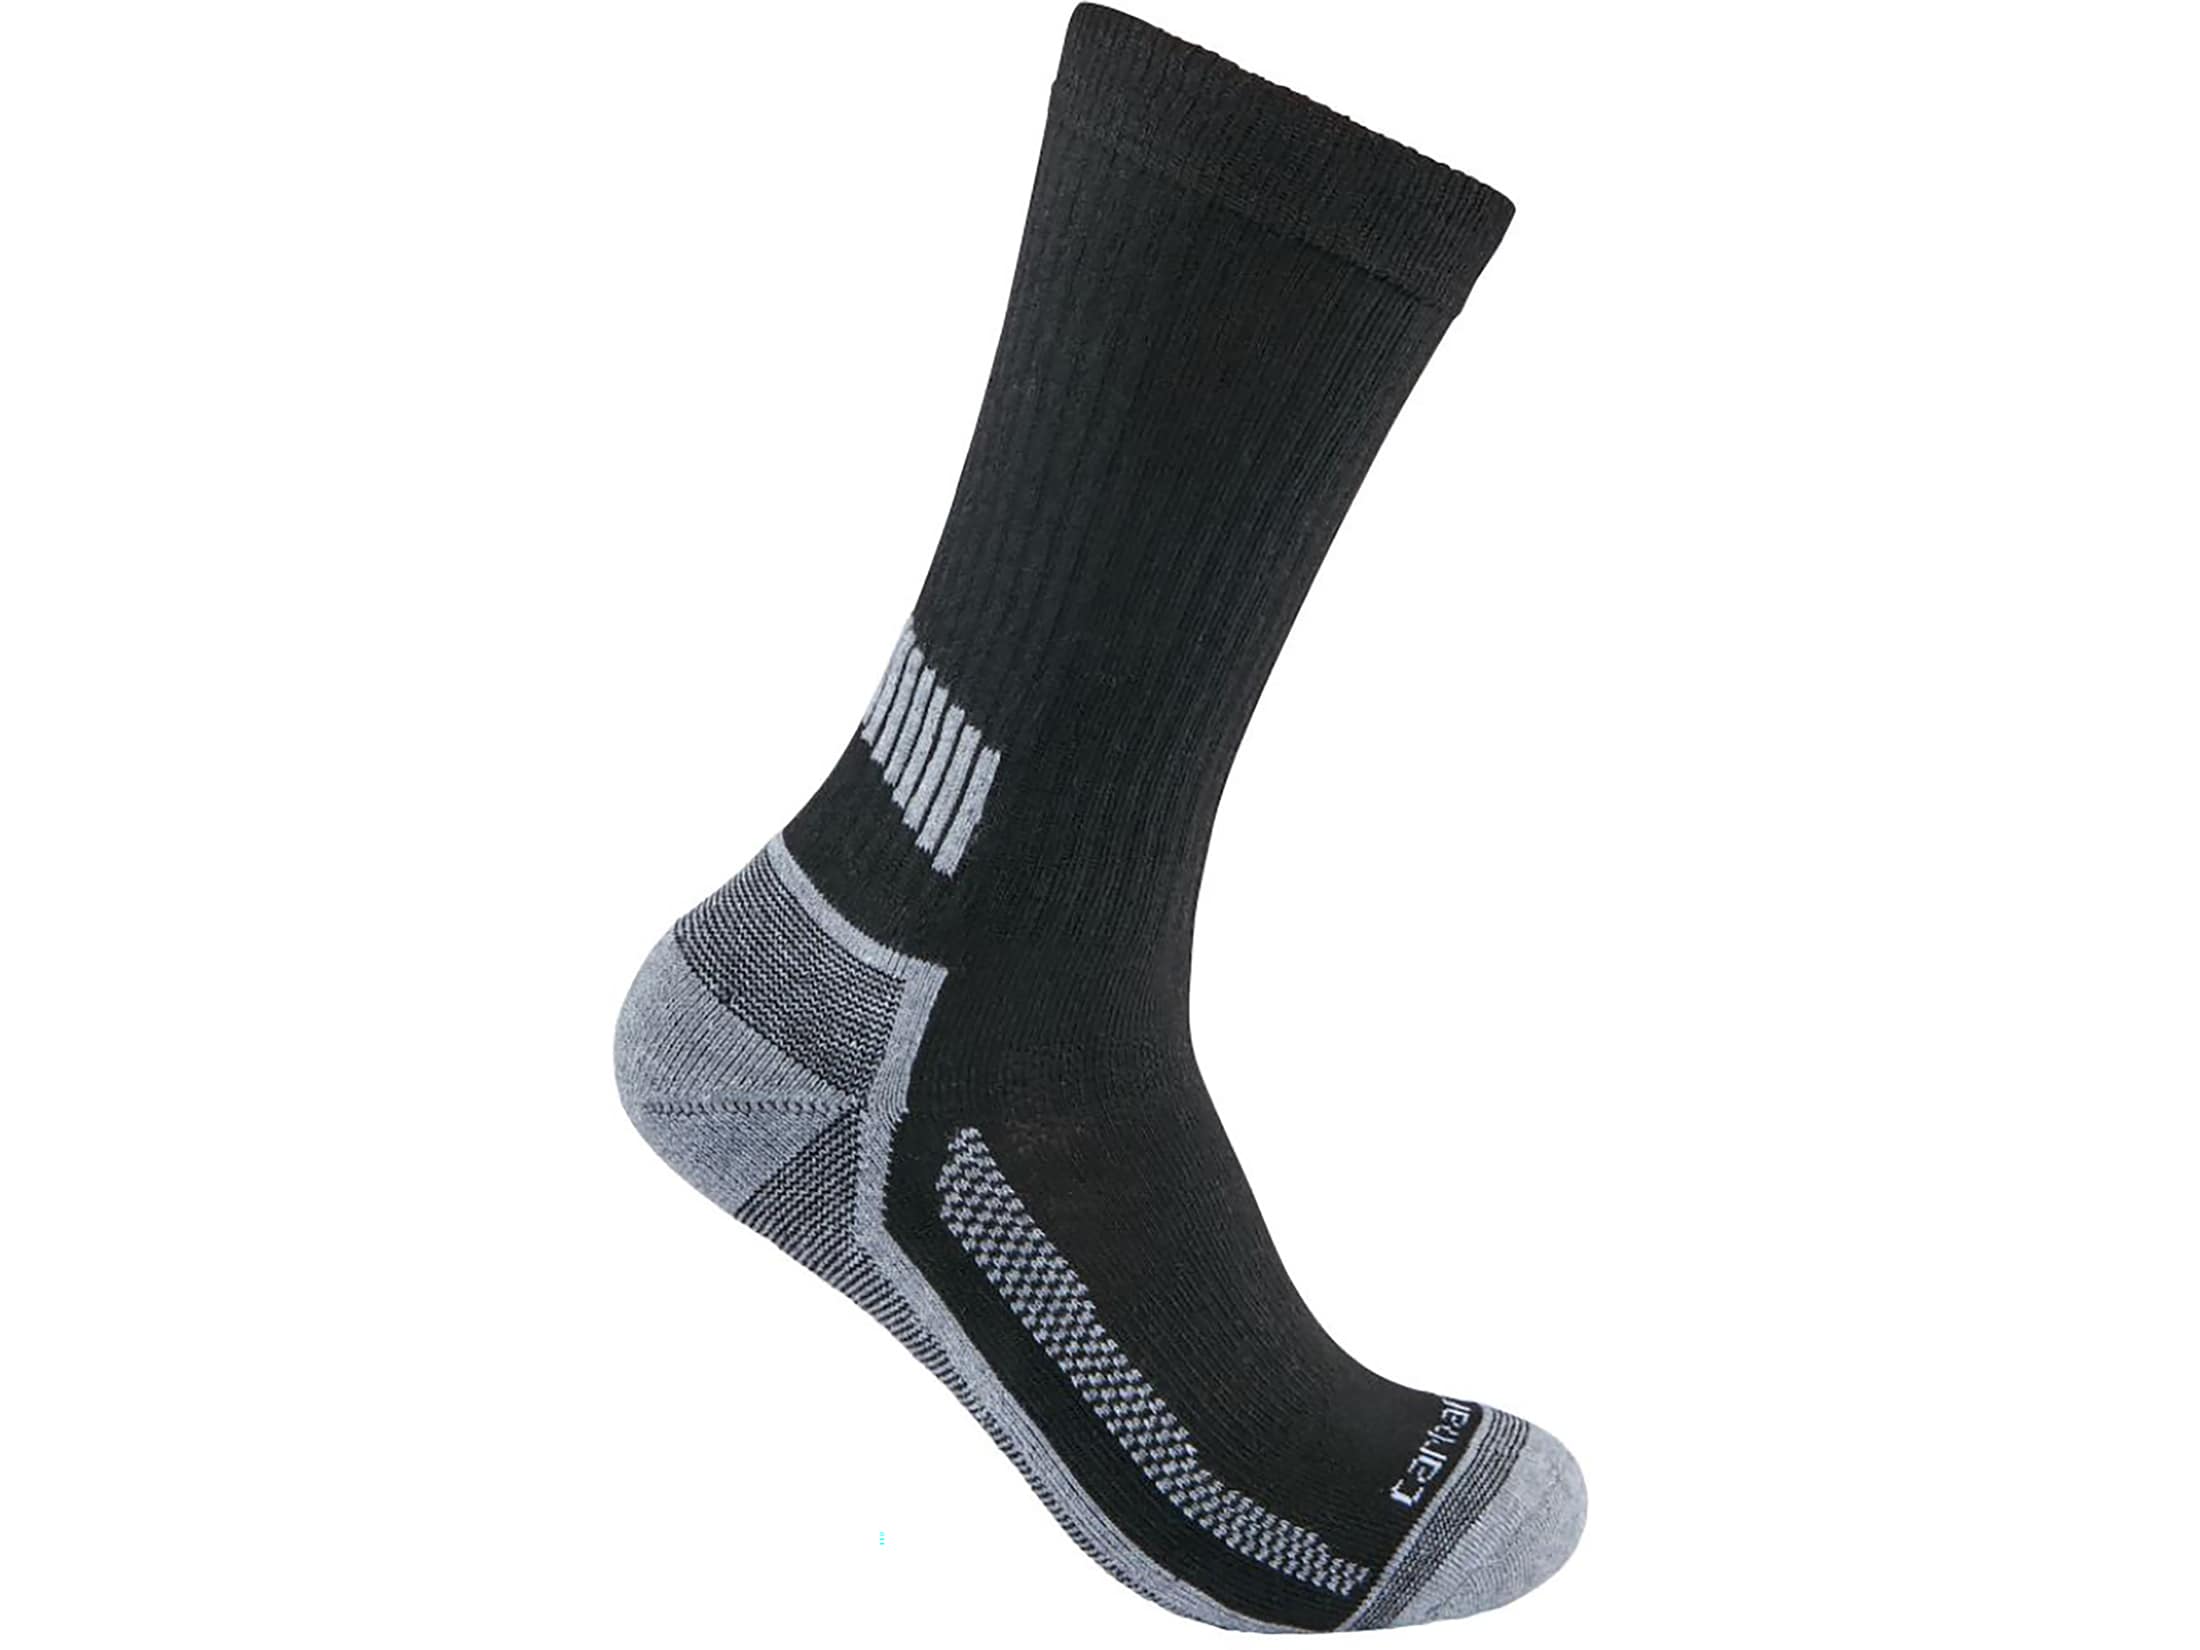 Carhartt Men's Force Midweight Crew Socks Charcoal Large 3 Pack